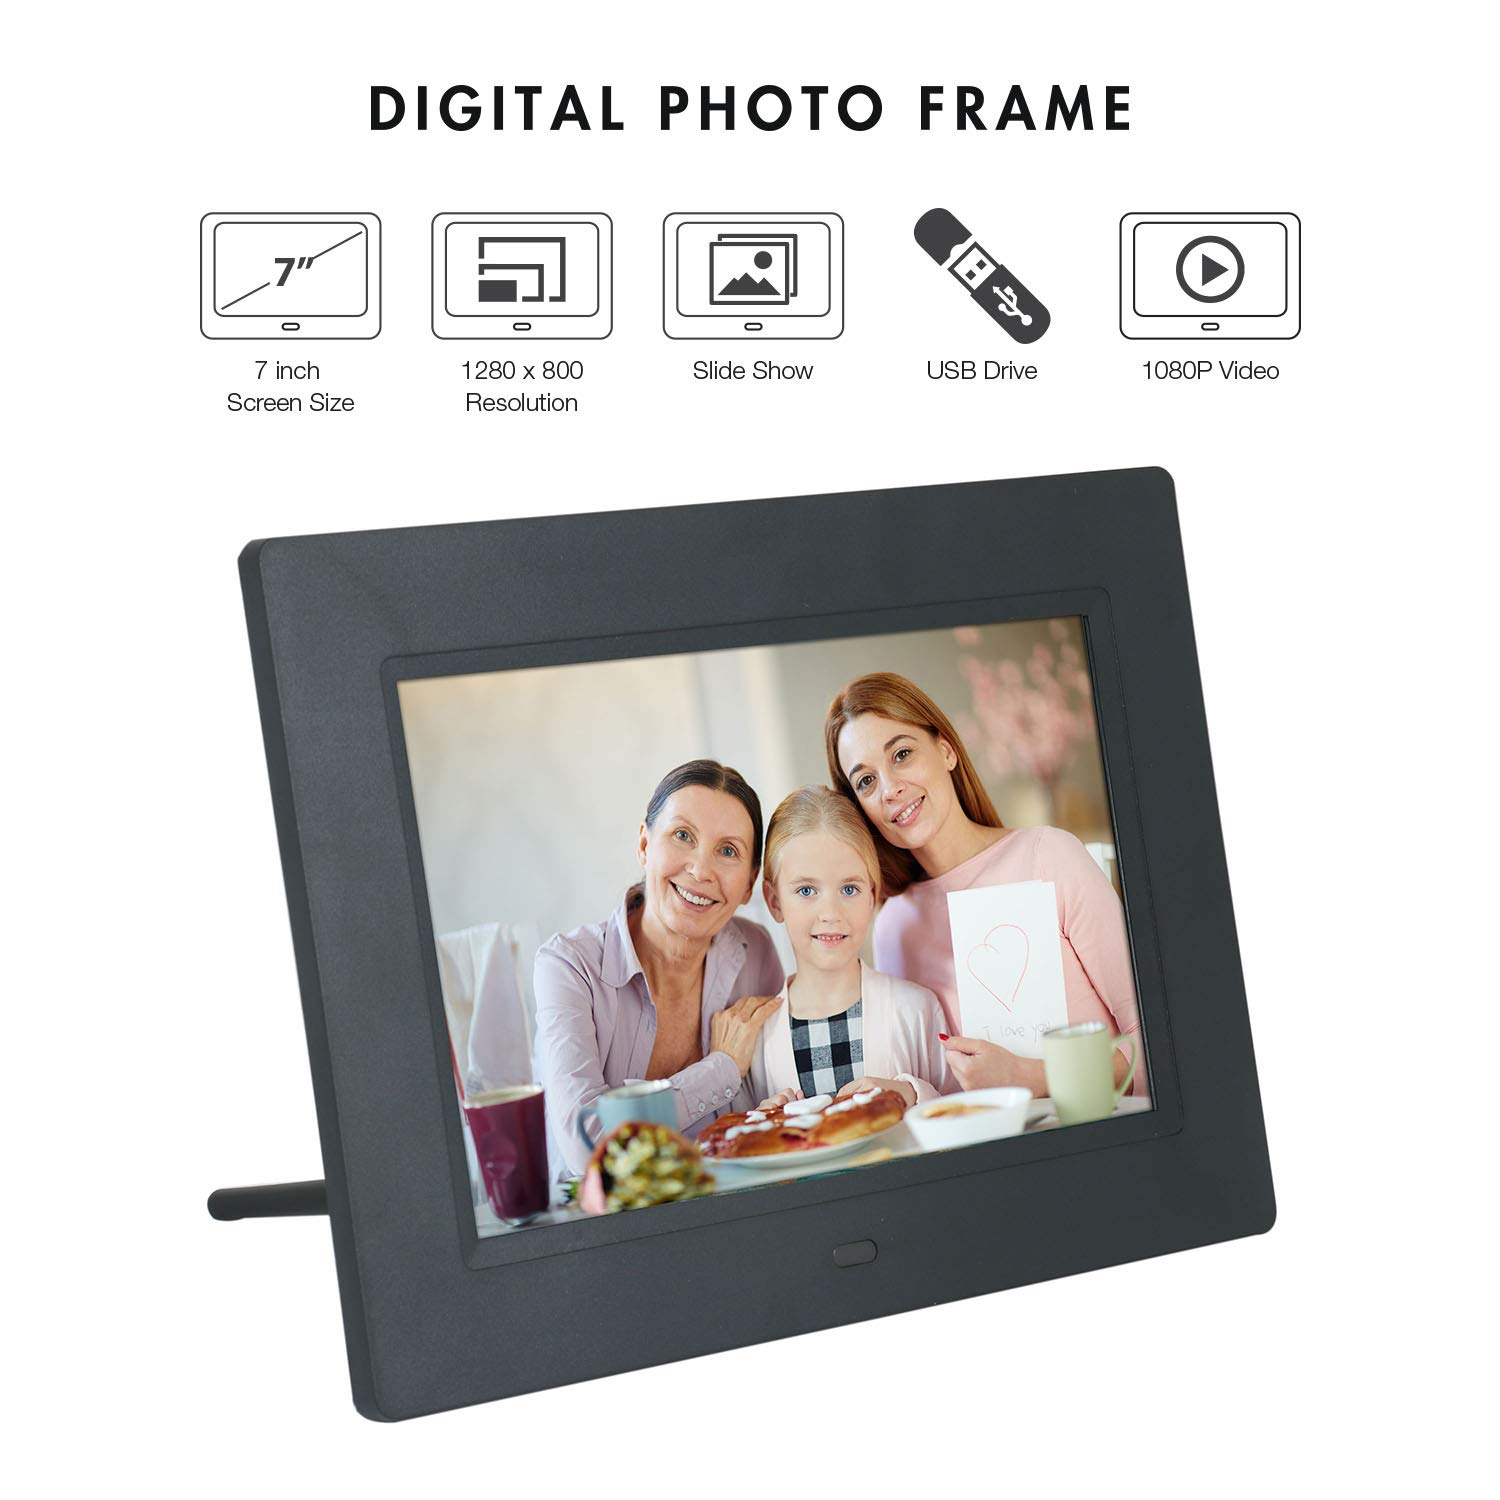 Digital Photo Frame 7 inch with Remote Plays Photos, Slide Show, Video, Audio,Calender,Alarm has Resolution 800x600 & Ratio 16:9 Supports SD Card, Pen Drive (USB), 3.5MM AUX (Black)